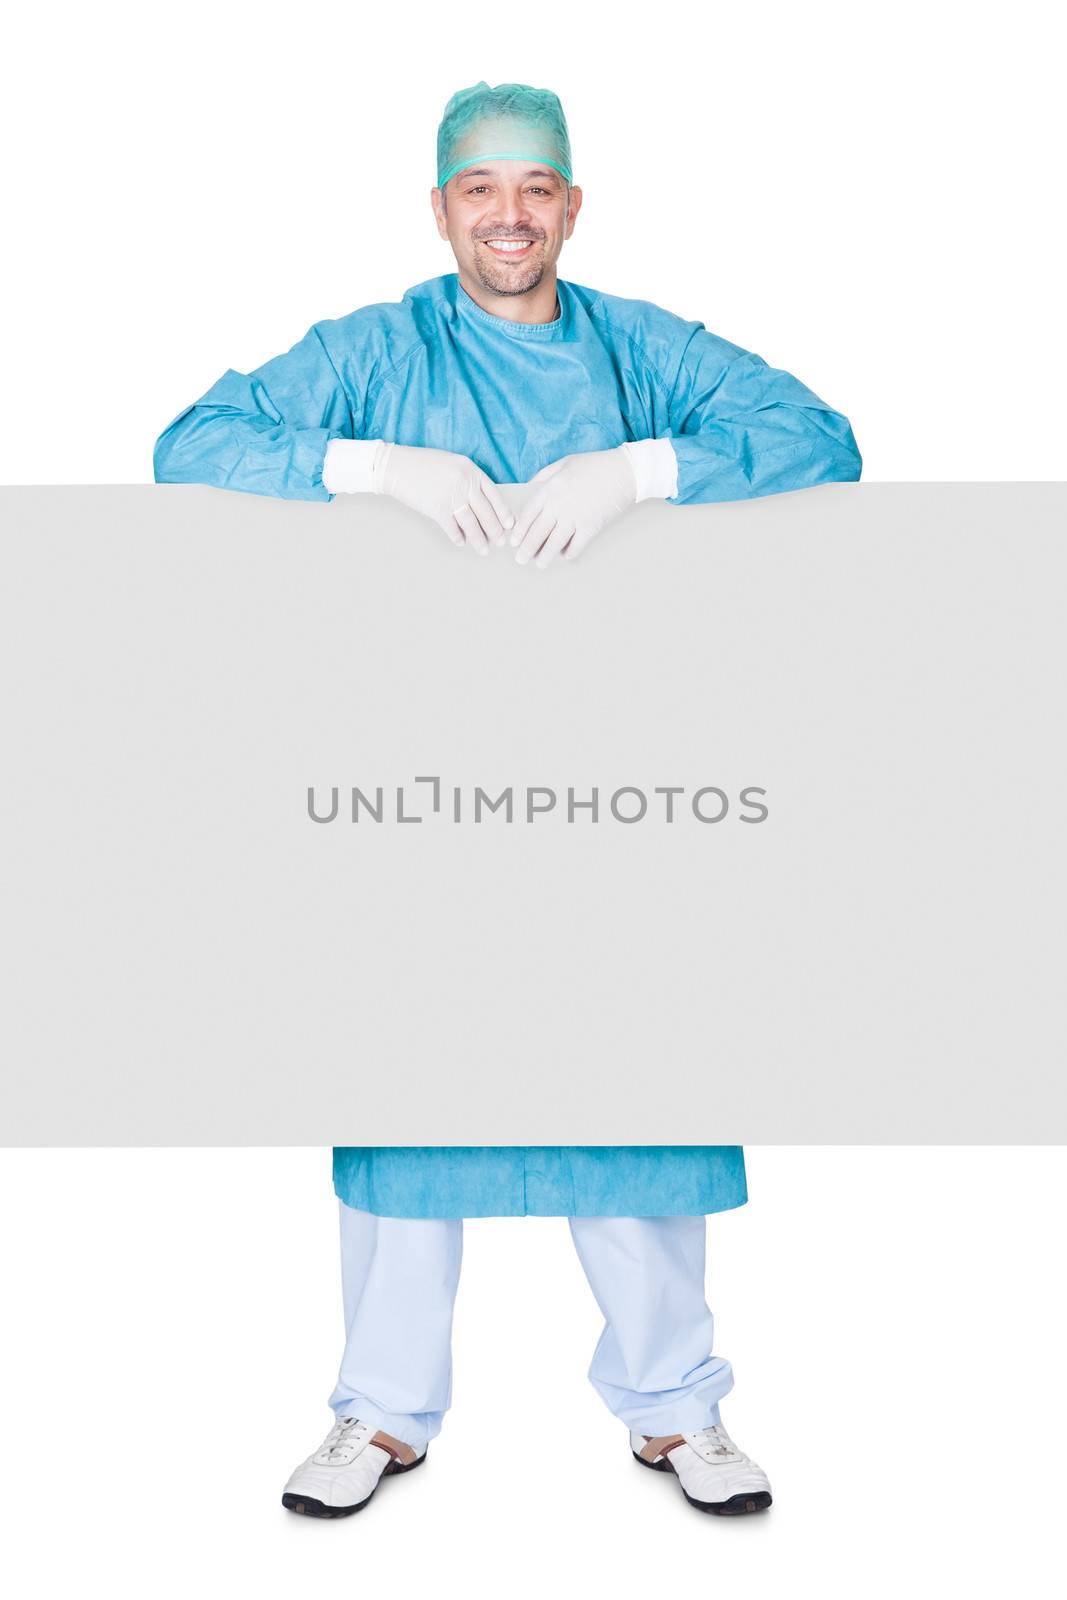 Doctor In Operation Gown Holding Blank Placard by AndreyPopov